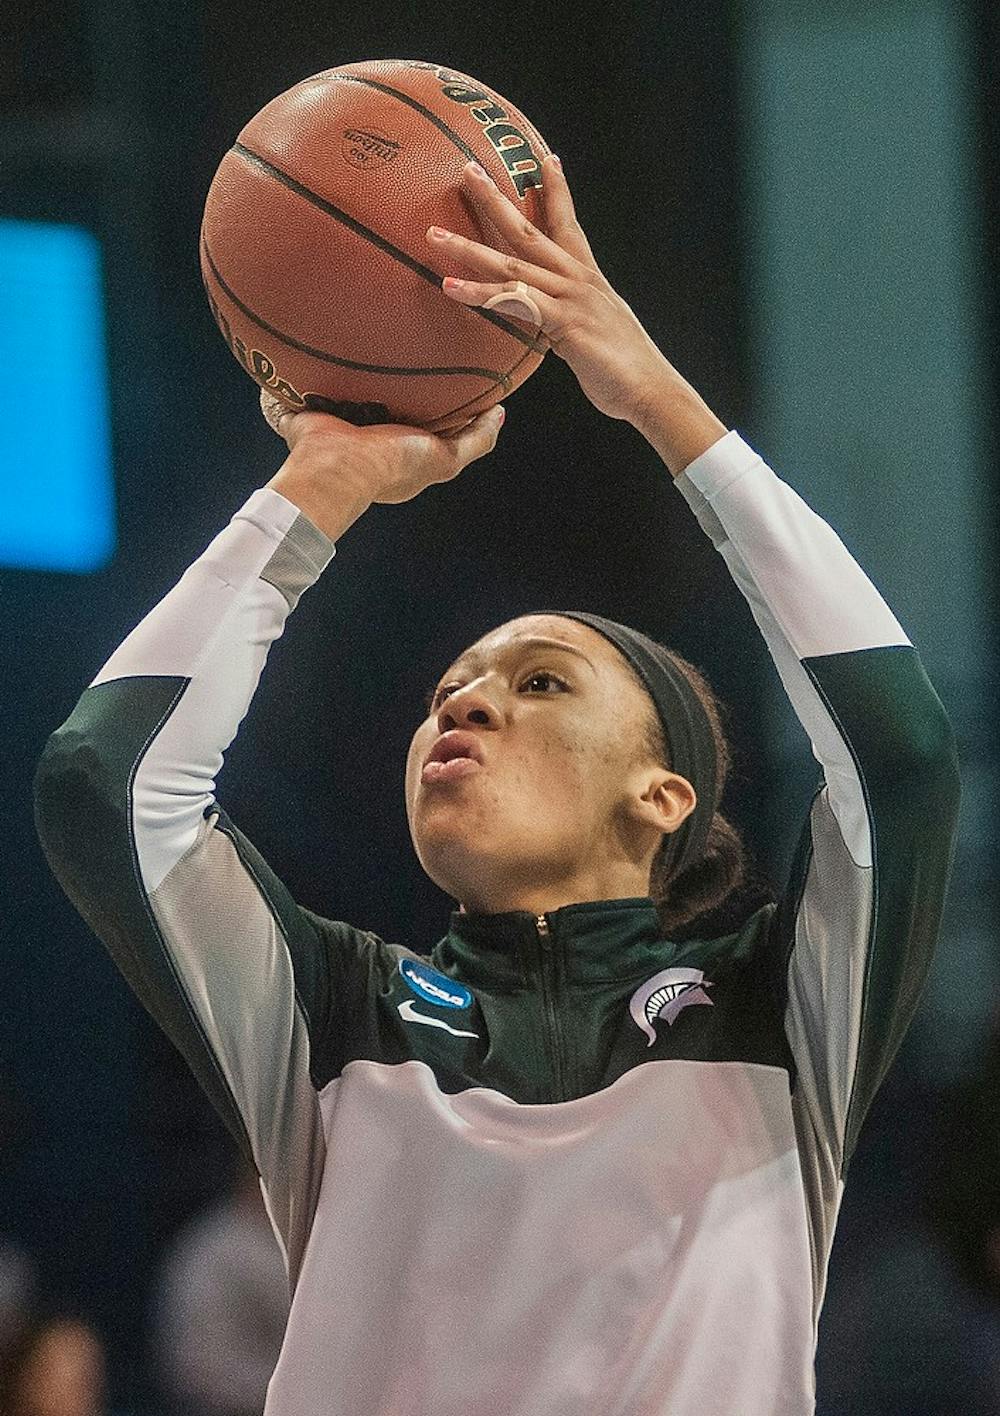 <p>Redshirt freshman Aerial Powers attempts a point March 25, 2014 during a game against North Carolina at Carmichael Arena in Chapel Hill, N.C. The Spartans lost, 62-53. Erin Hampton/The State News</p>